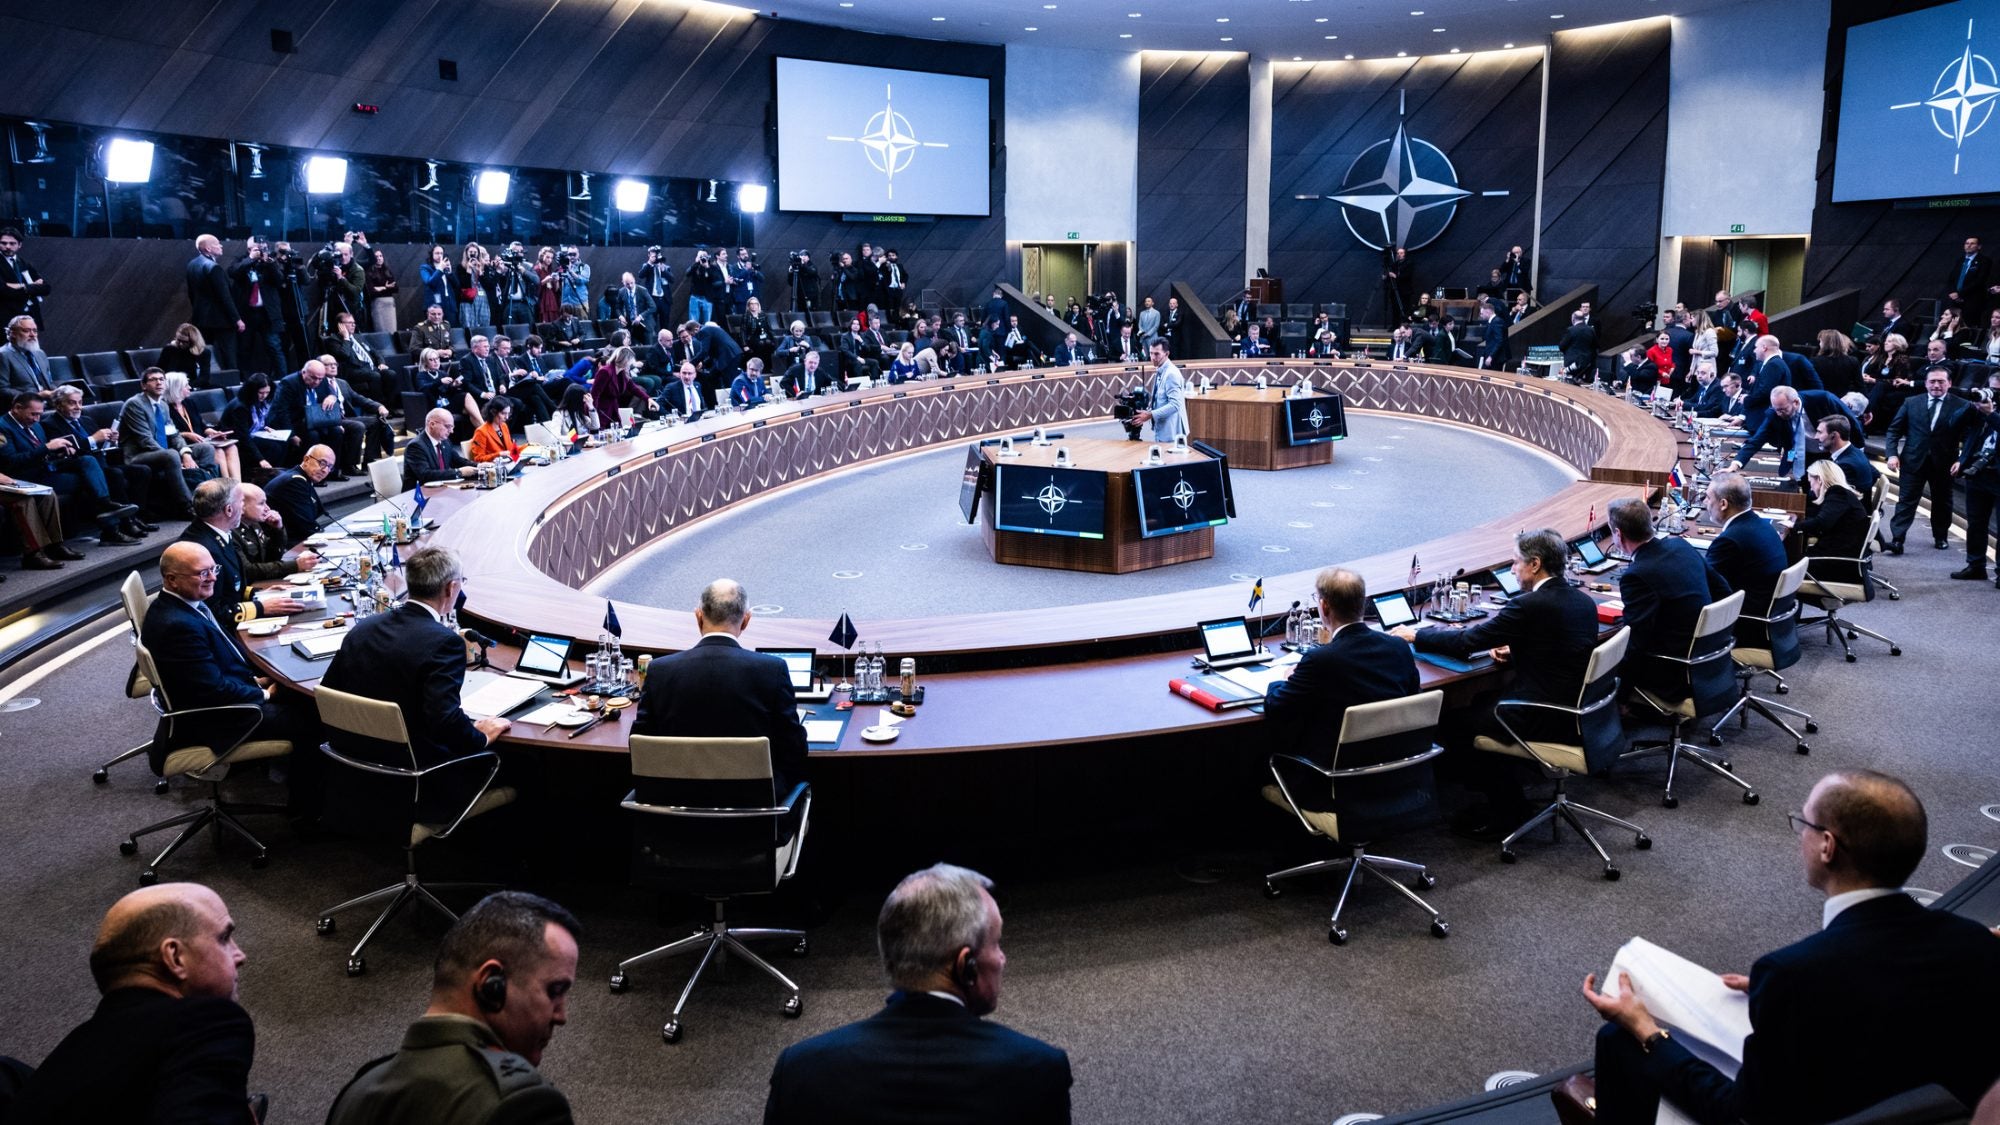 NATO members seated at the meeting